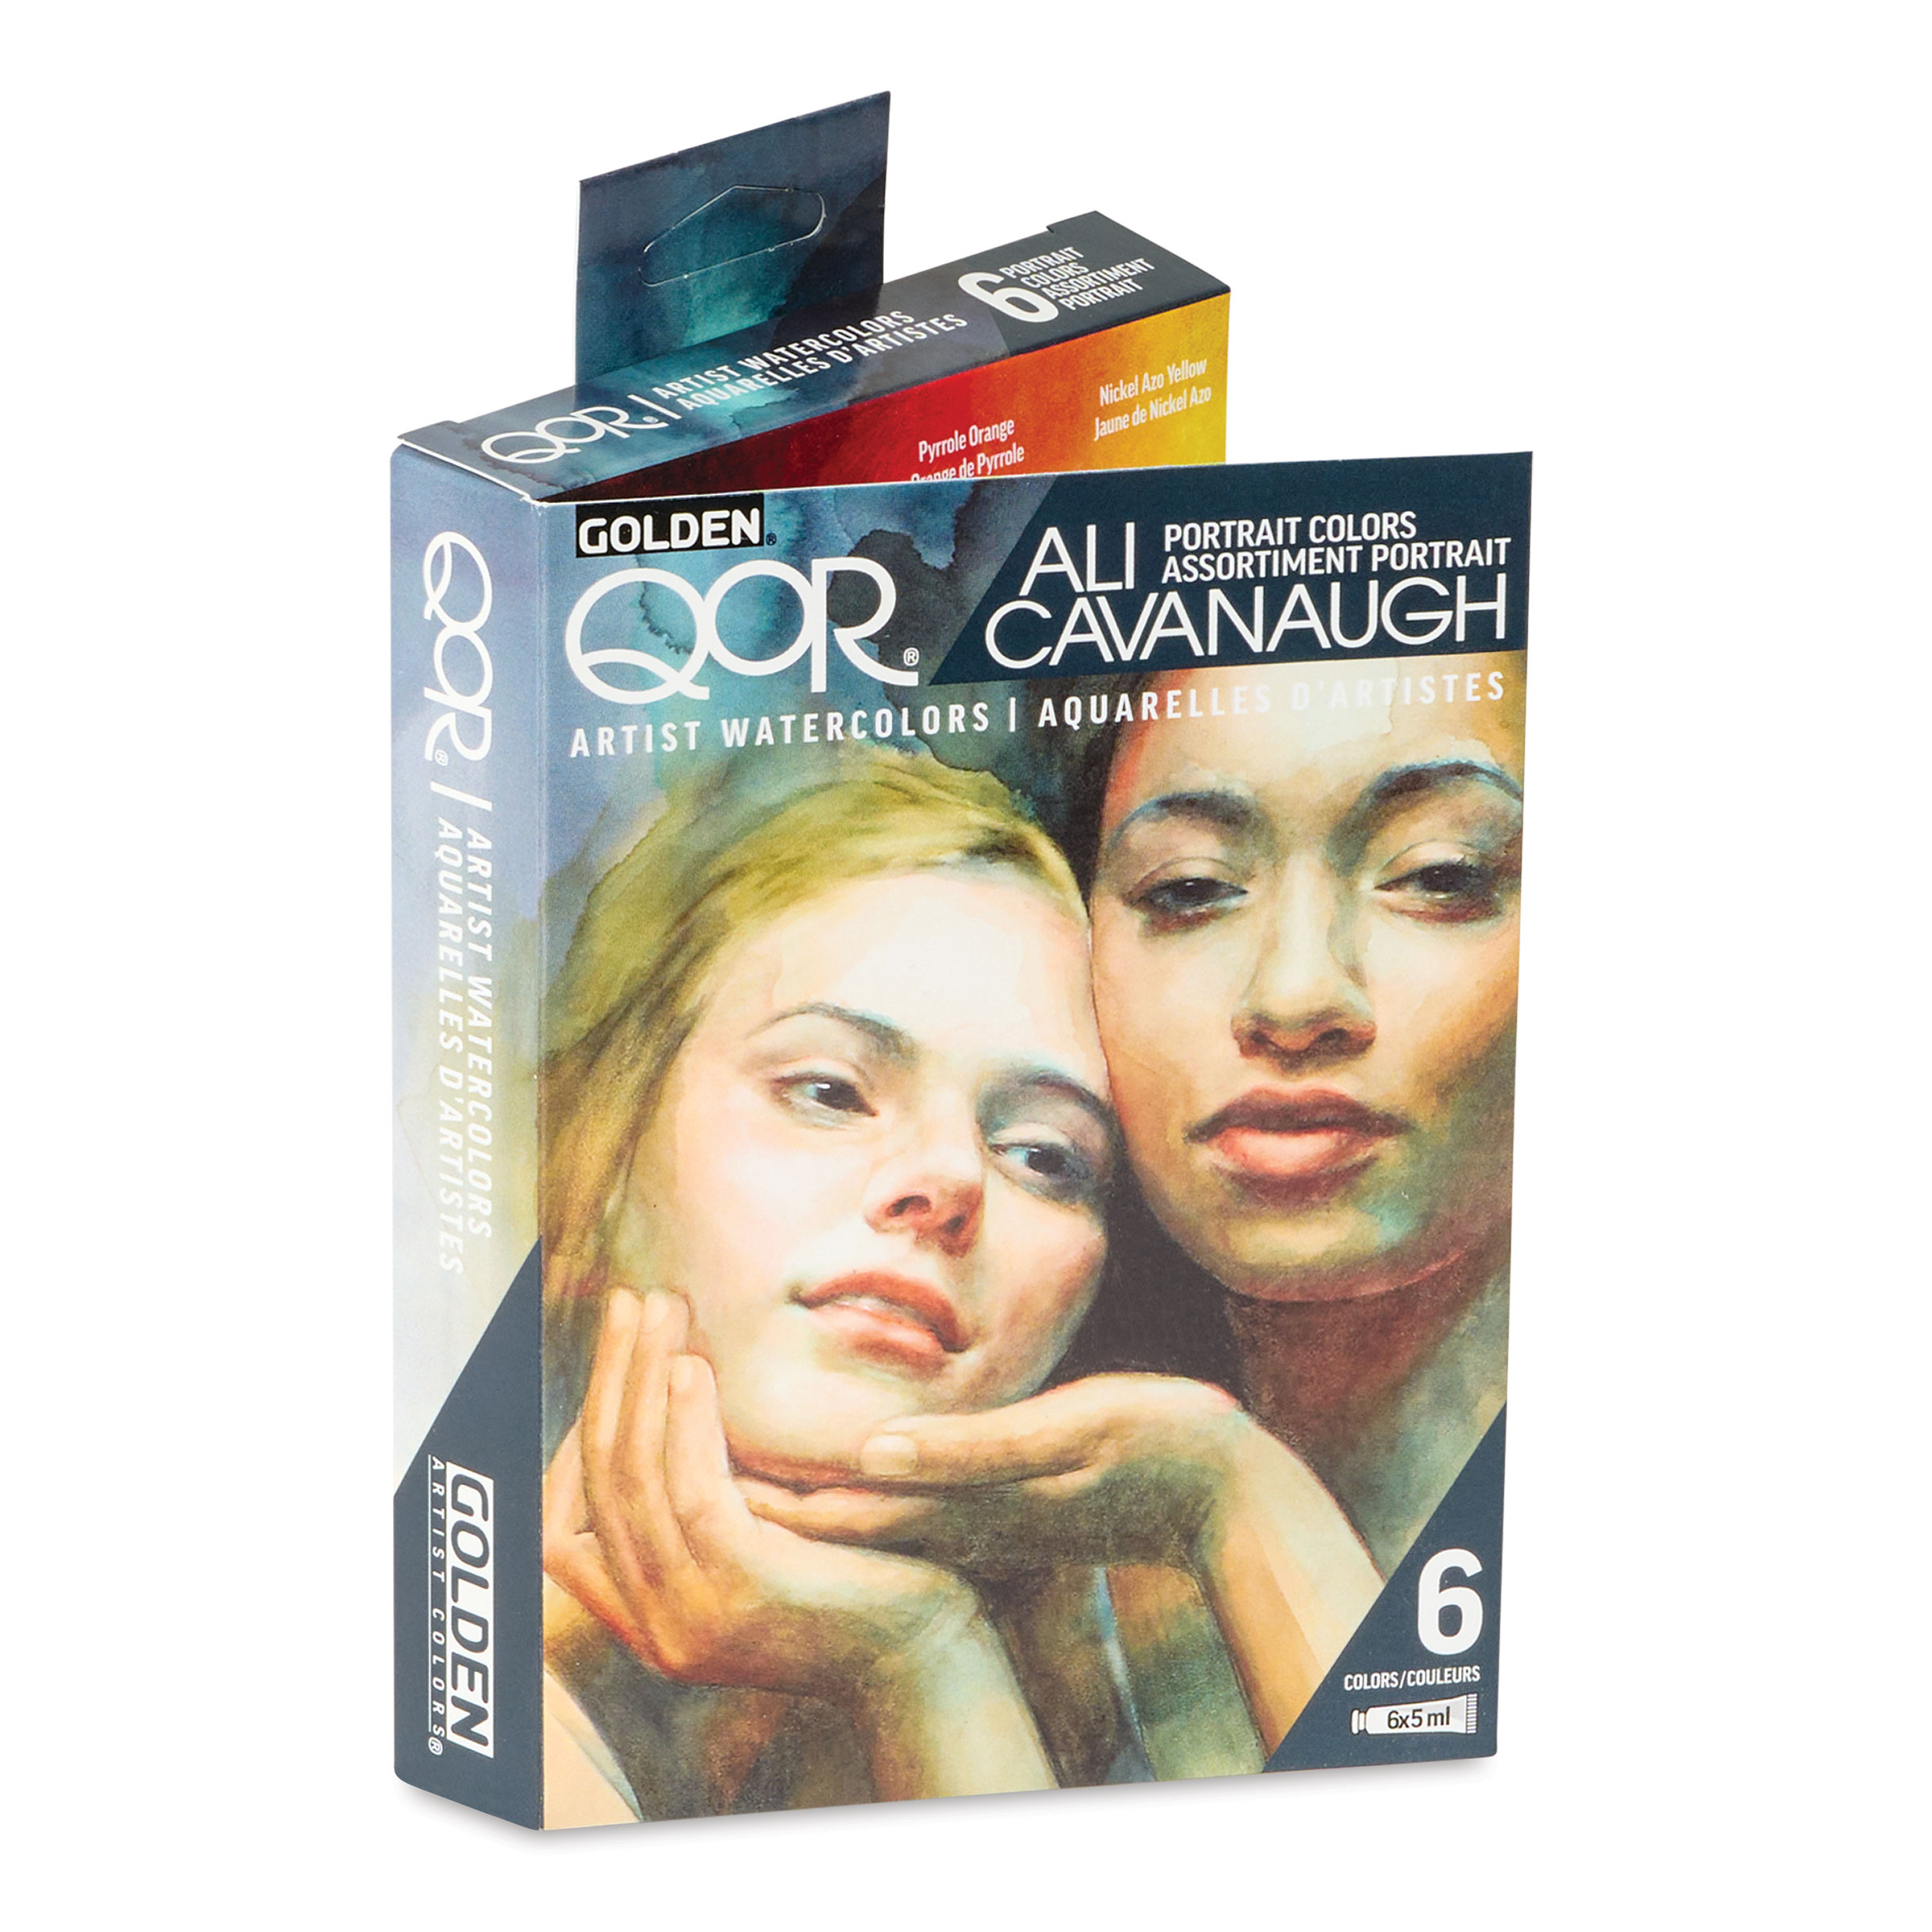 Be prepared for different colors in QOR watercolor sets! - WetCanvas:  Online Living for Artists